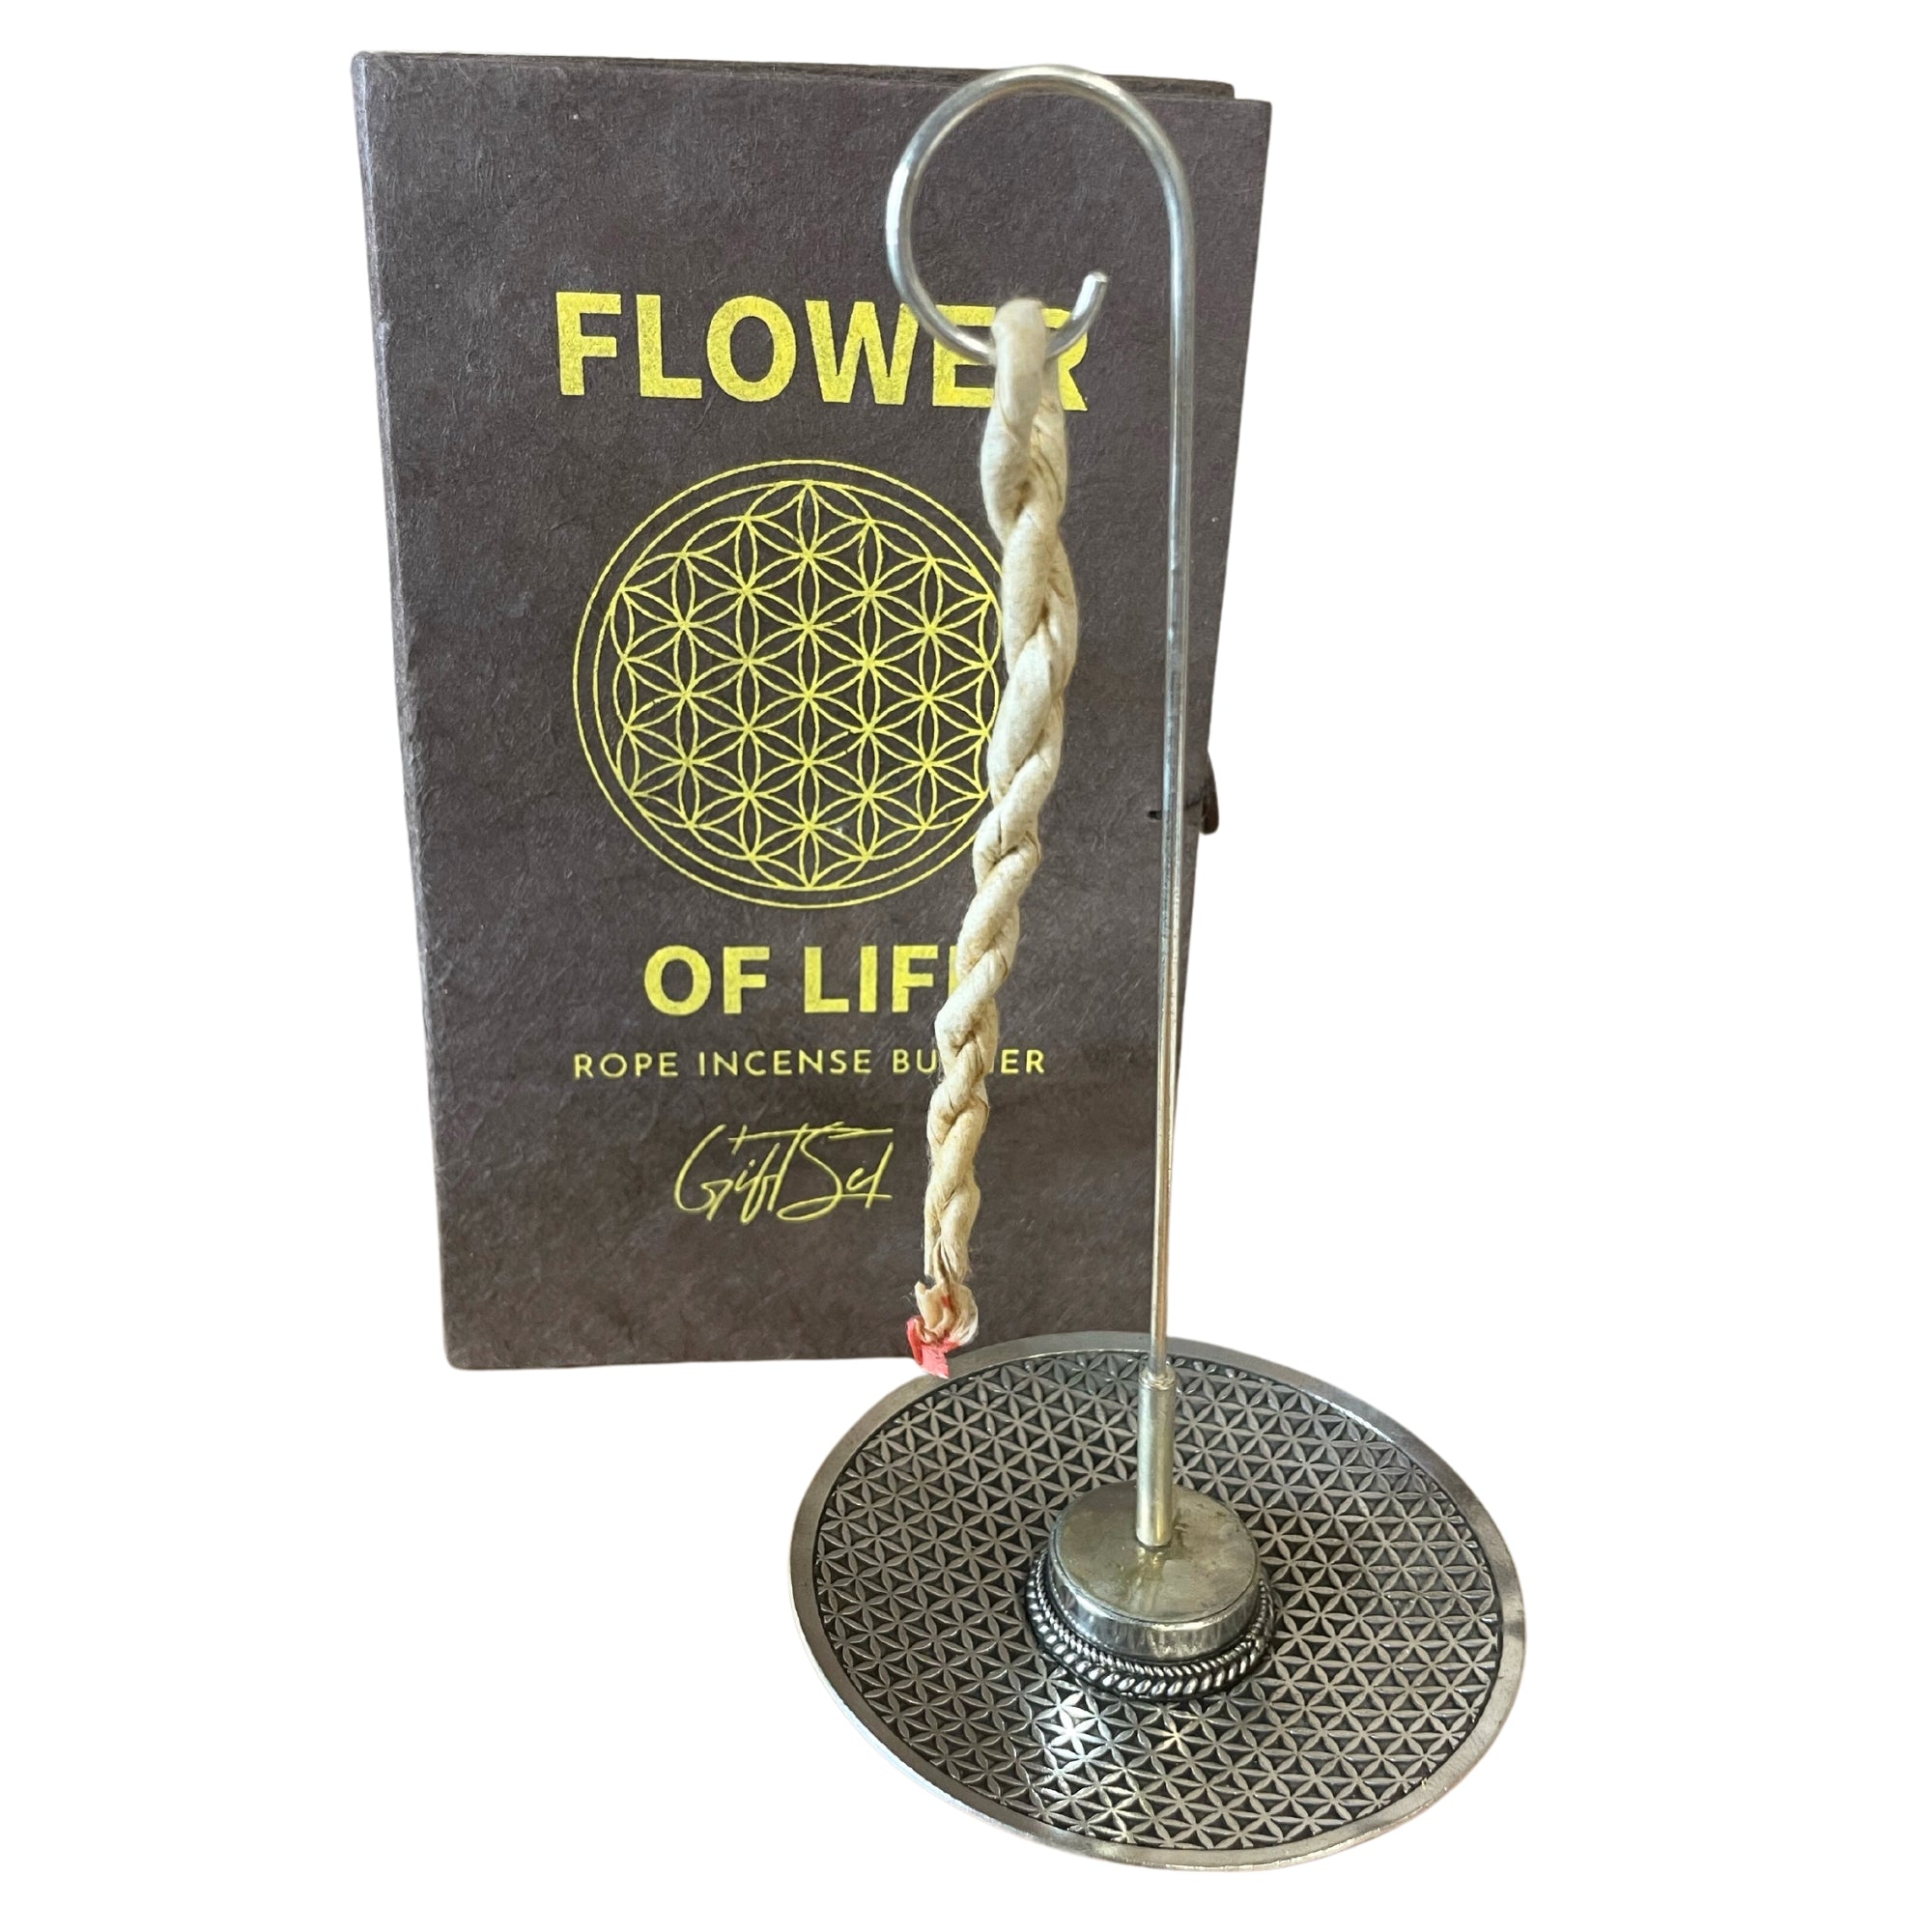 View Rope Incense and Silver Plated Holder Set F10er of Life information